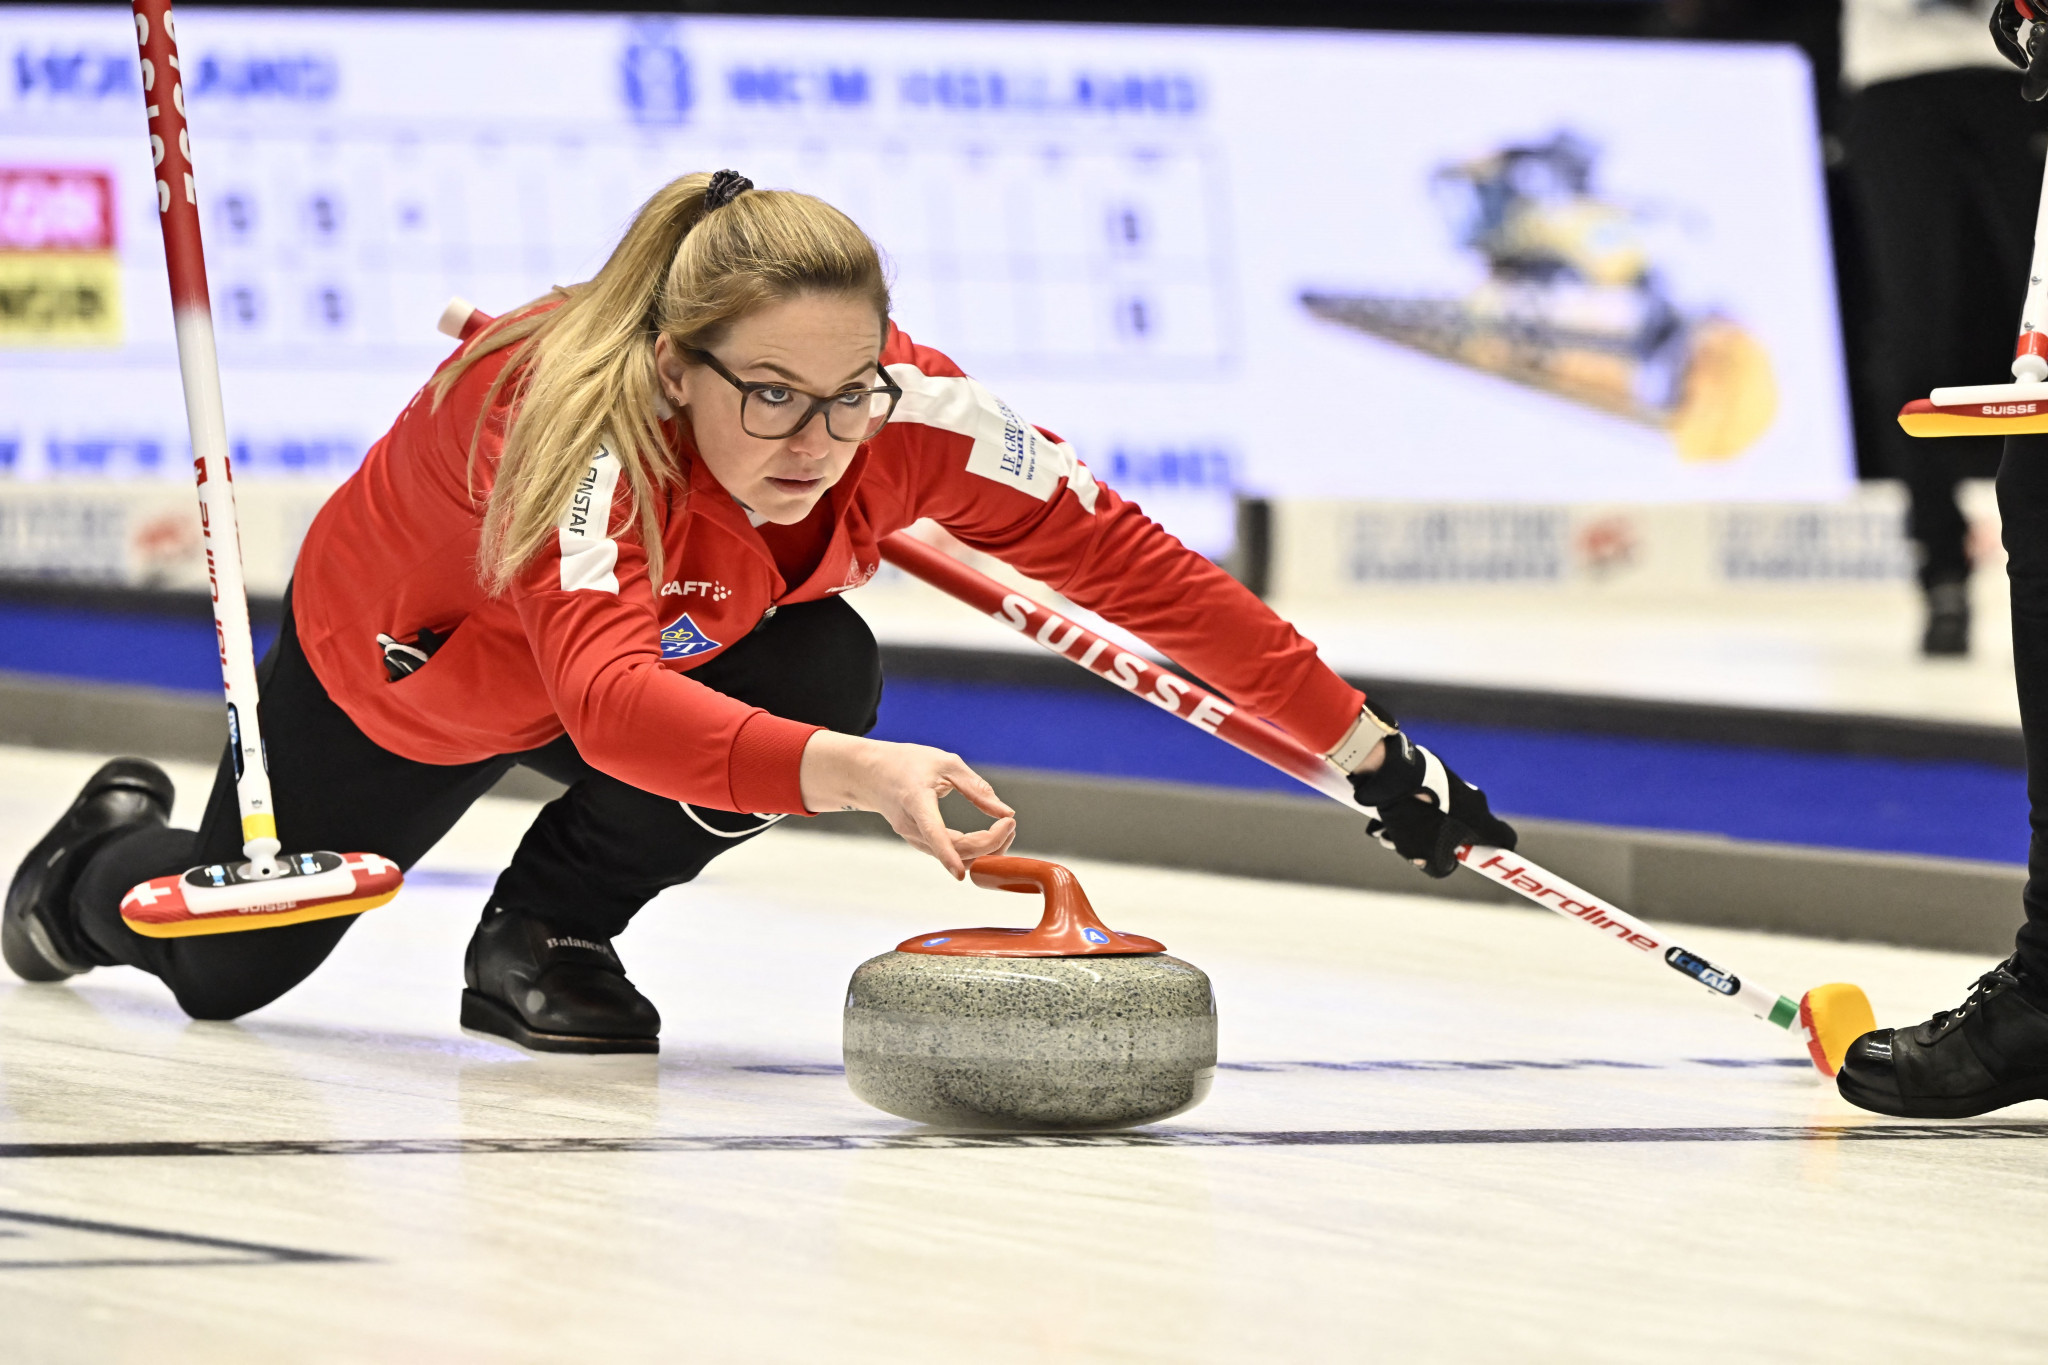 Switzerland won their sixth straight game at the World Women's Curling Championship ©World Curling